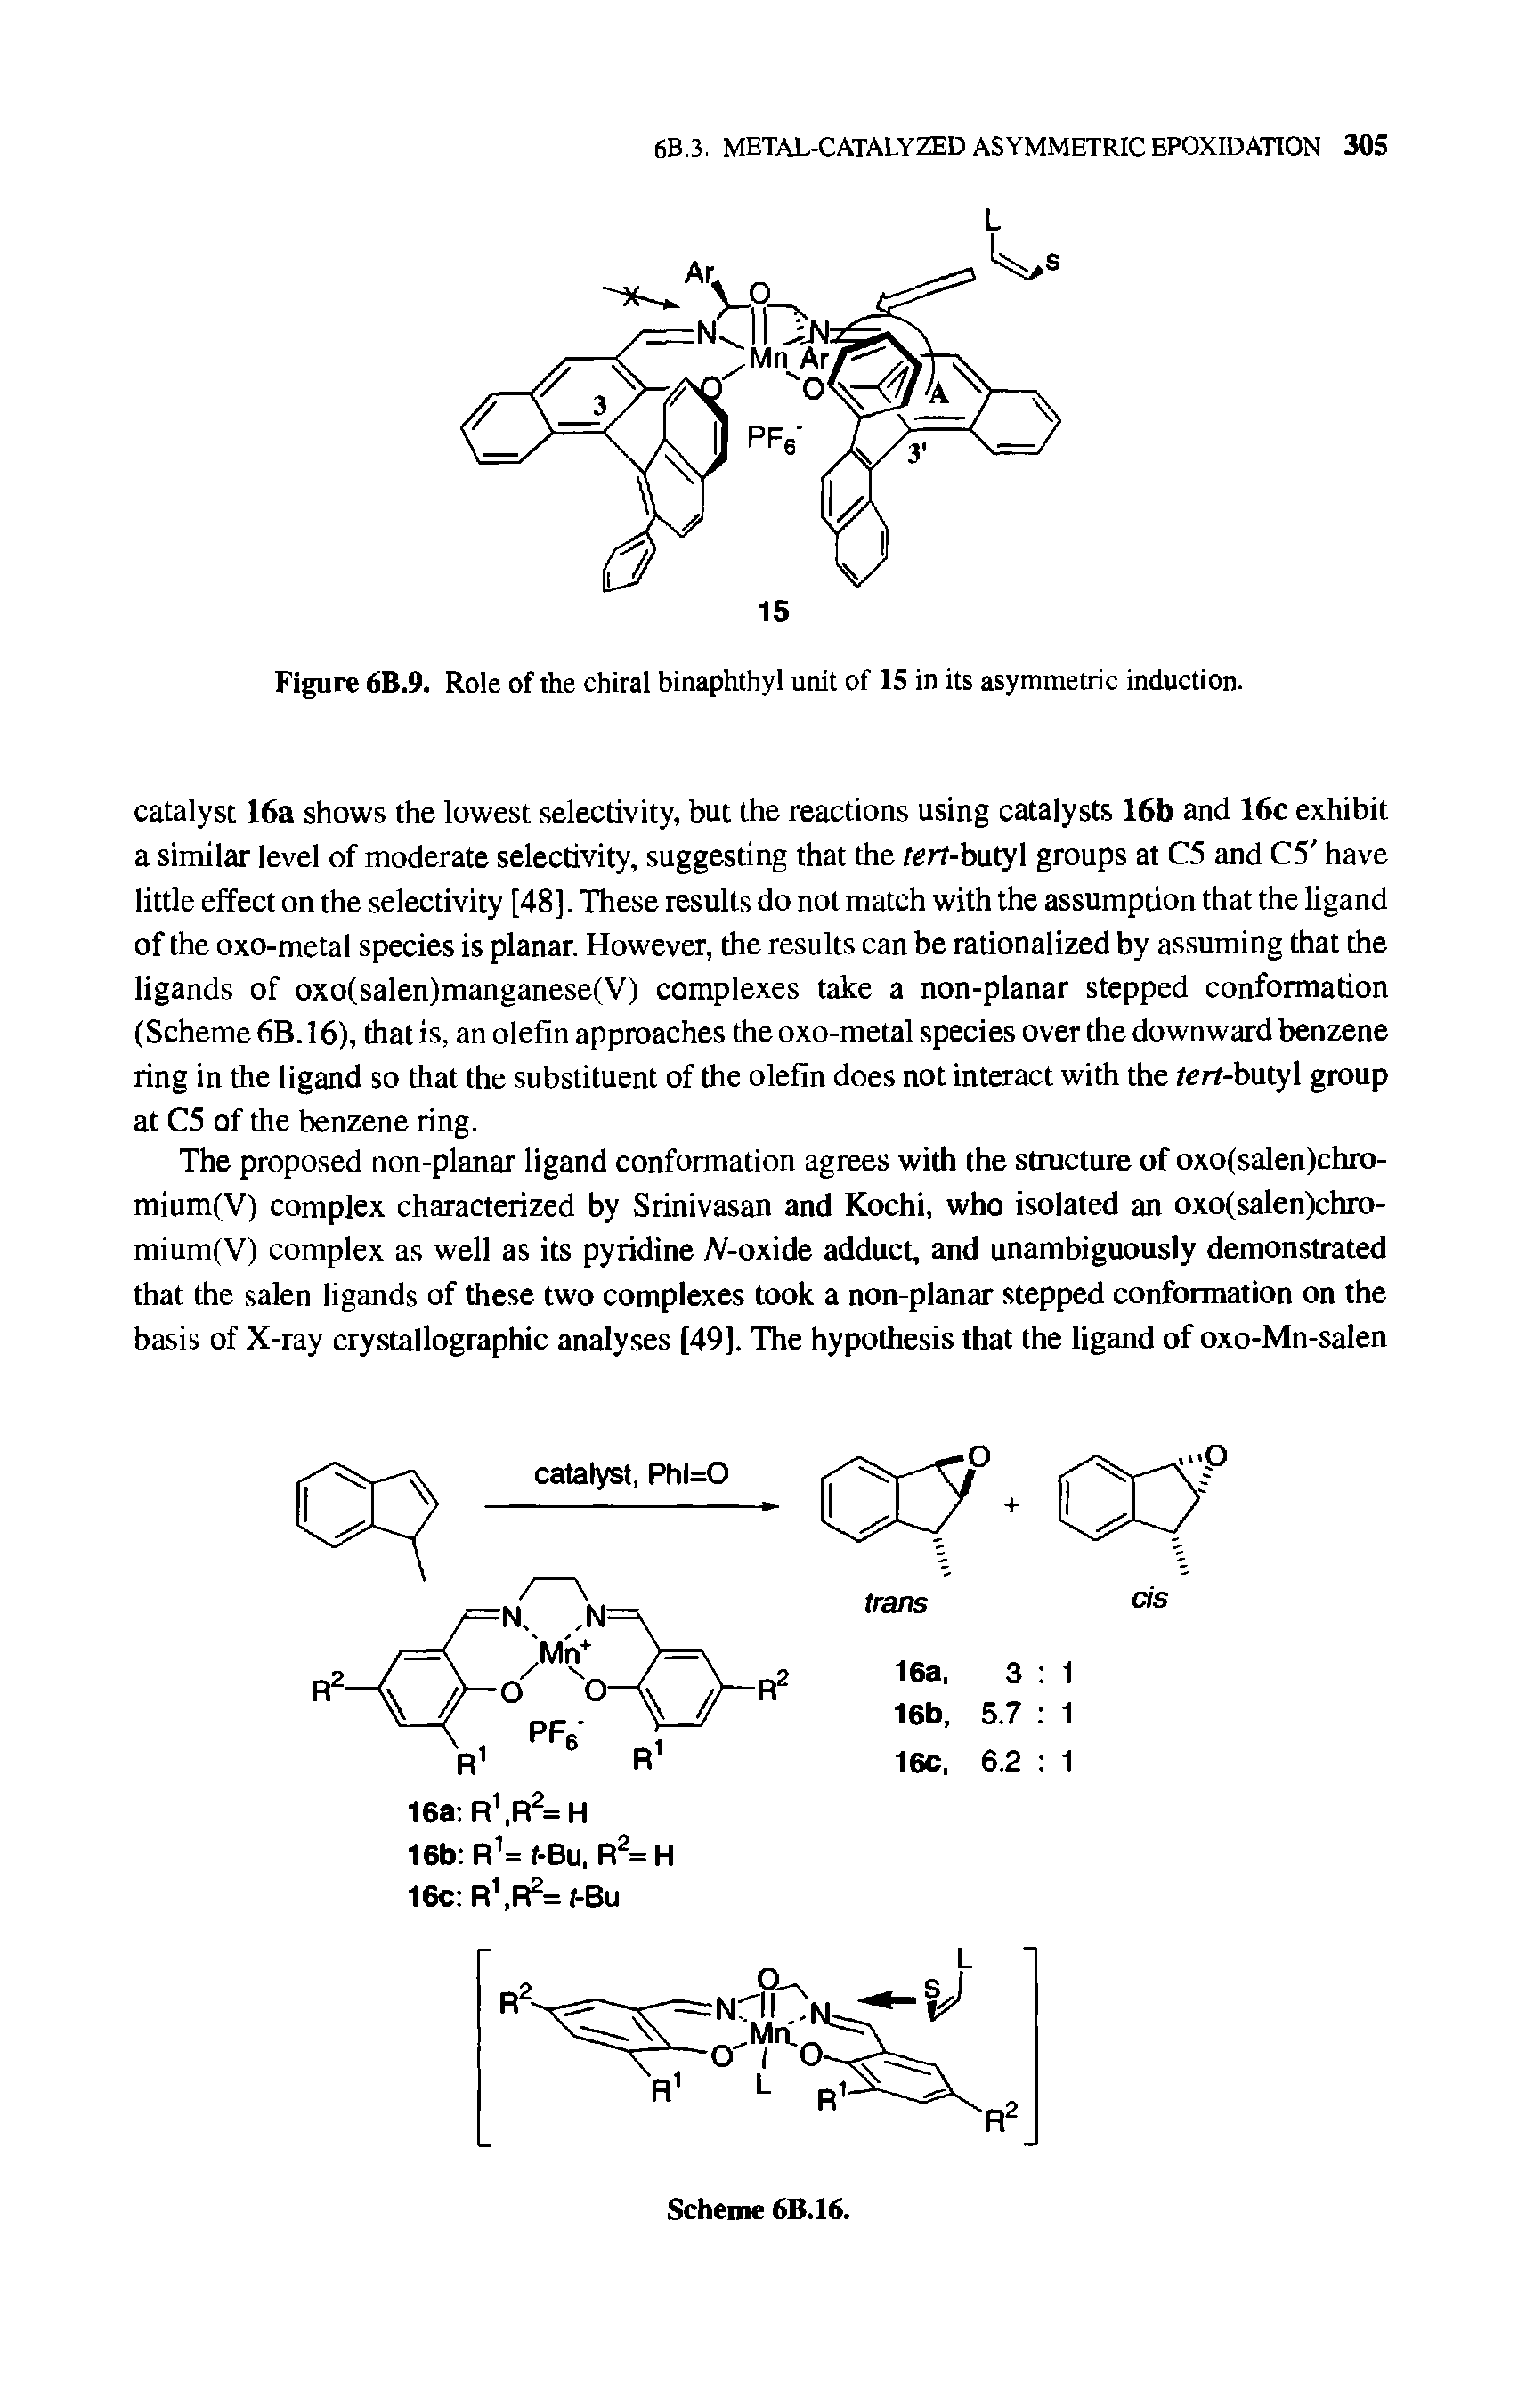 Figure 6B.9. Role of the chiral binaphthyl unit of 15 in its asymmetric induction.